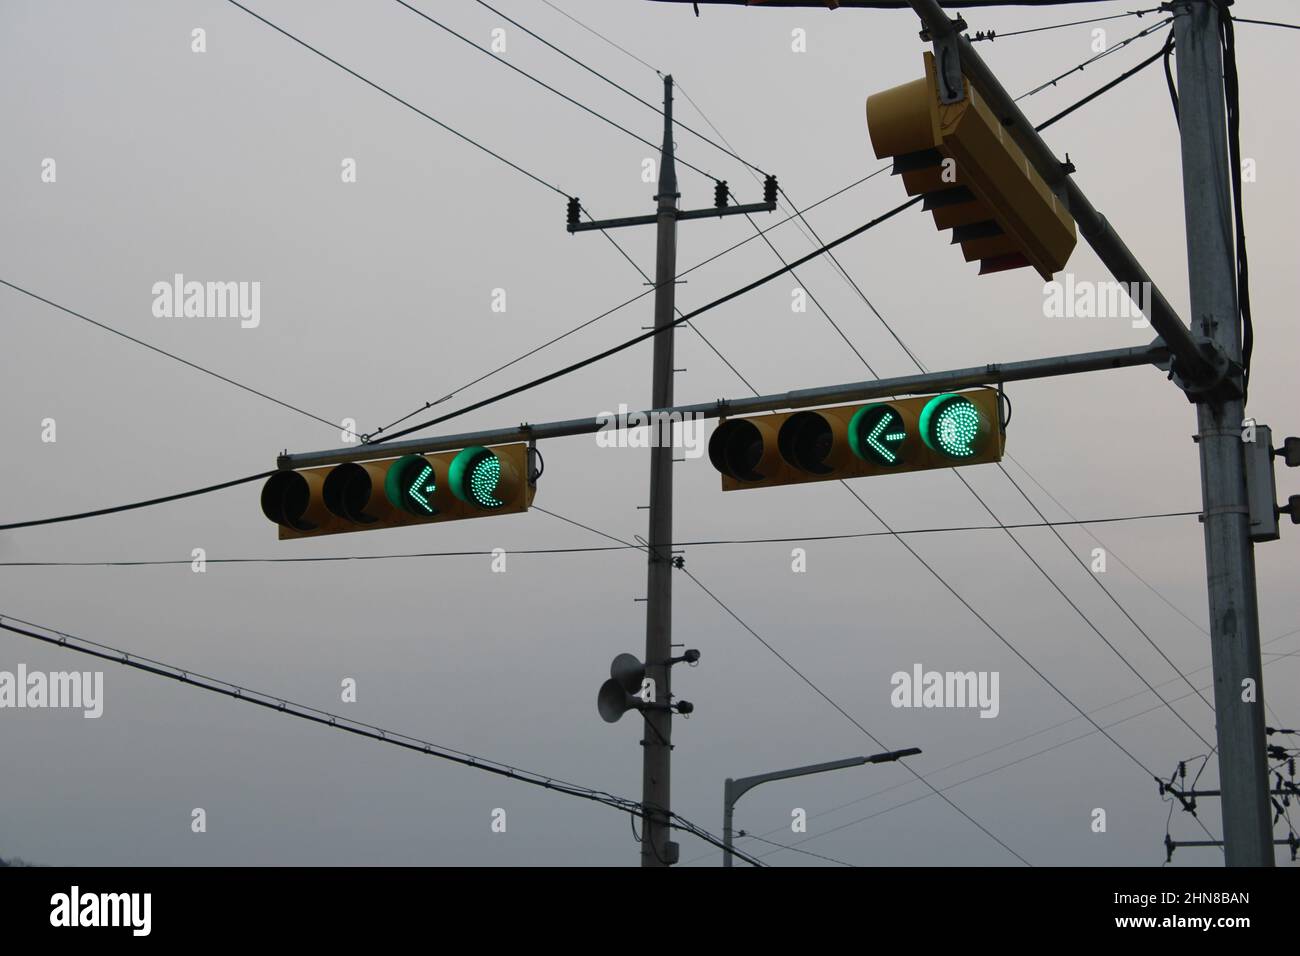 Green lights and arrows over traffic intersection, during stormy weather Stock Photo